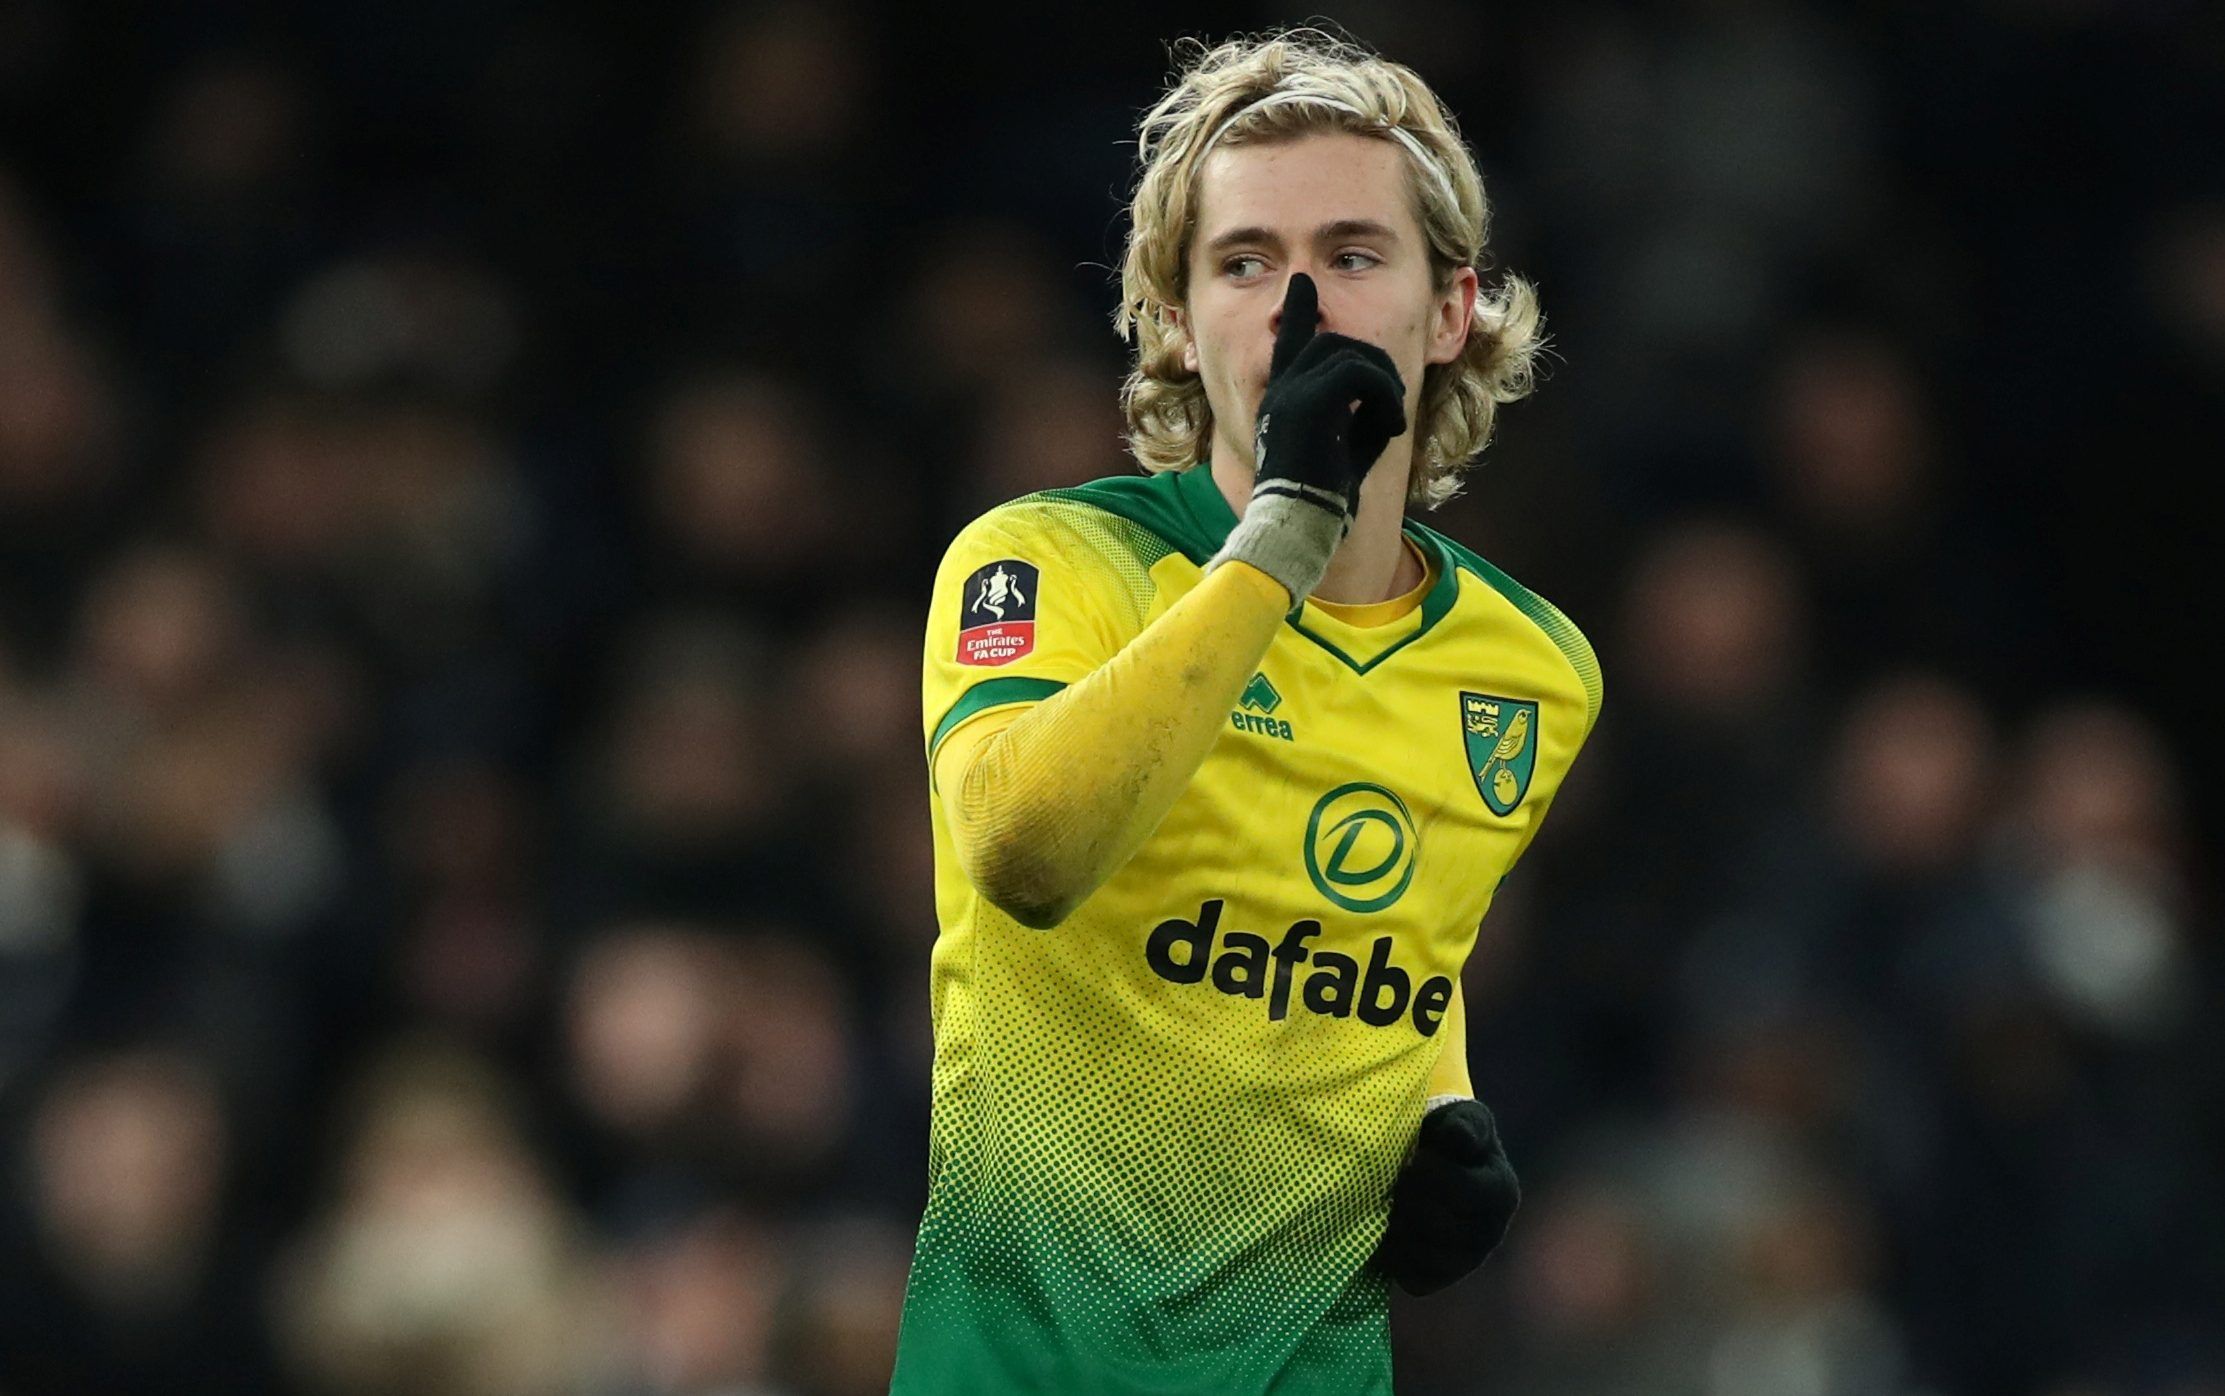 Soccer Football - FA Cup Fifth Round - Tottenham Hotspur v Norwich City - Tottenham Hotspur Stadium, London, Britain - March 4, 2020  Norwich City's Todd Cantwell celebrates after winning the penalty shootout  Action Images via Reuters/Peter Cziborra